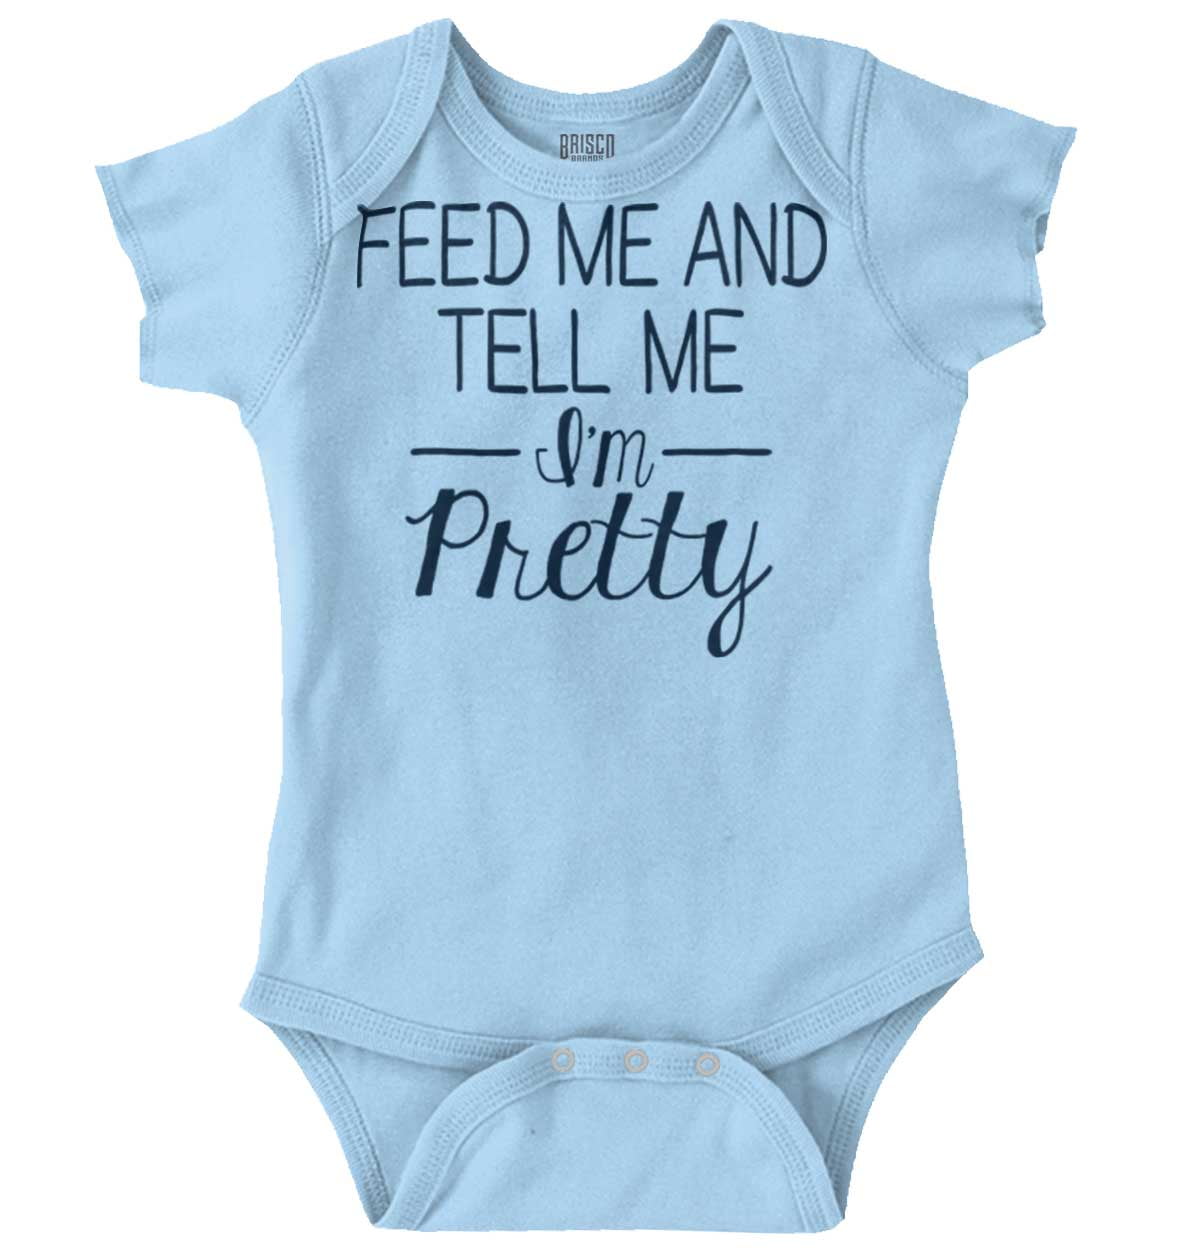 Welcome To The Show Funny Baby Bodysuit 